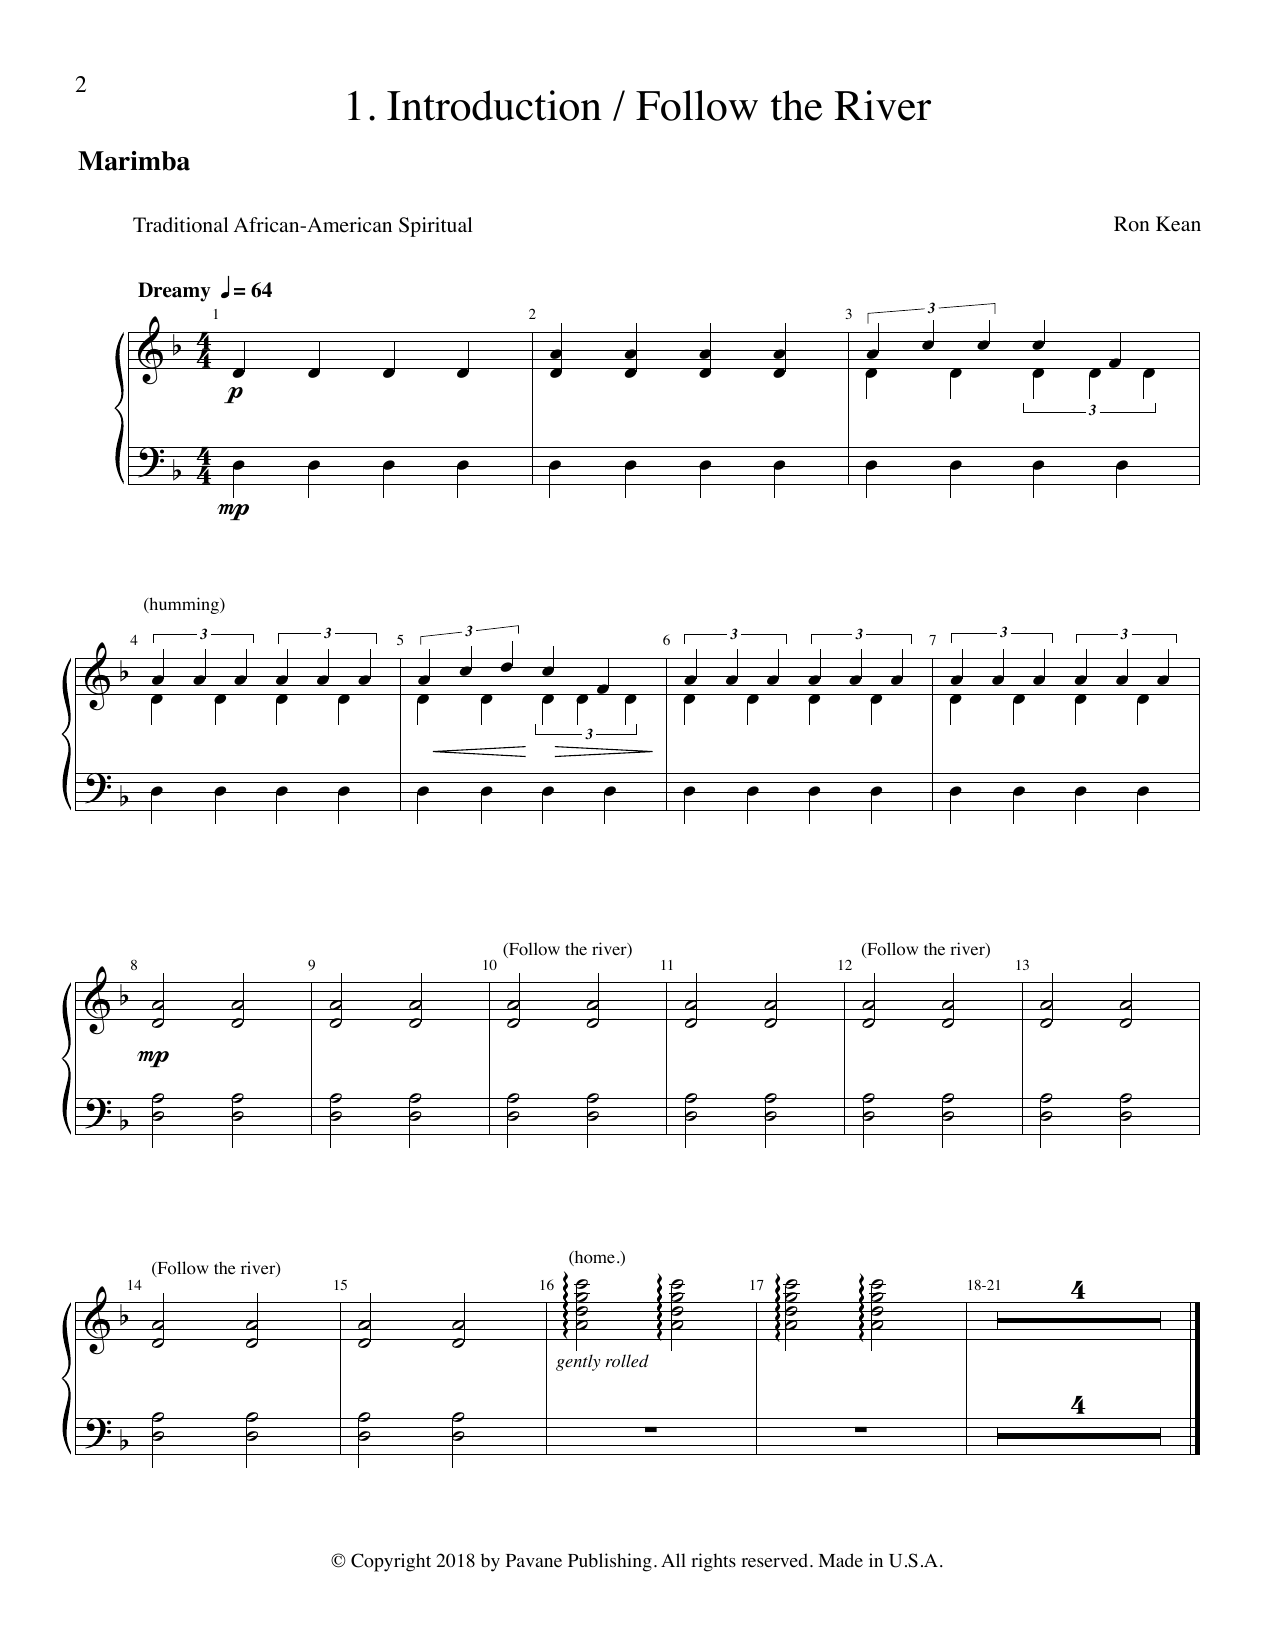 Download Ron Kean The Journey of Harriet Tubman (for SSAA Sheet Music